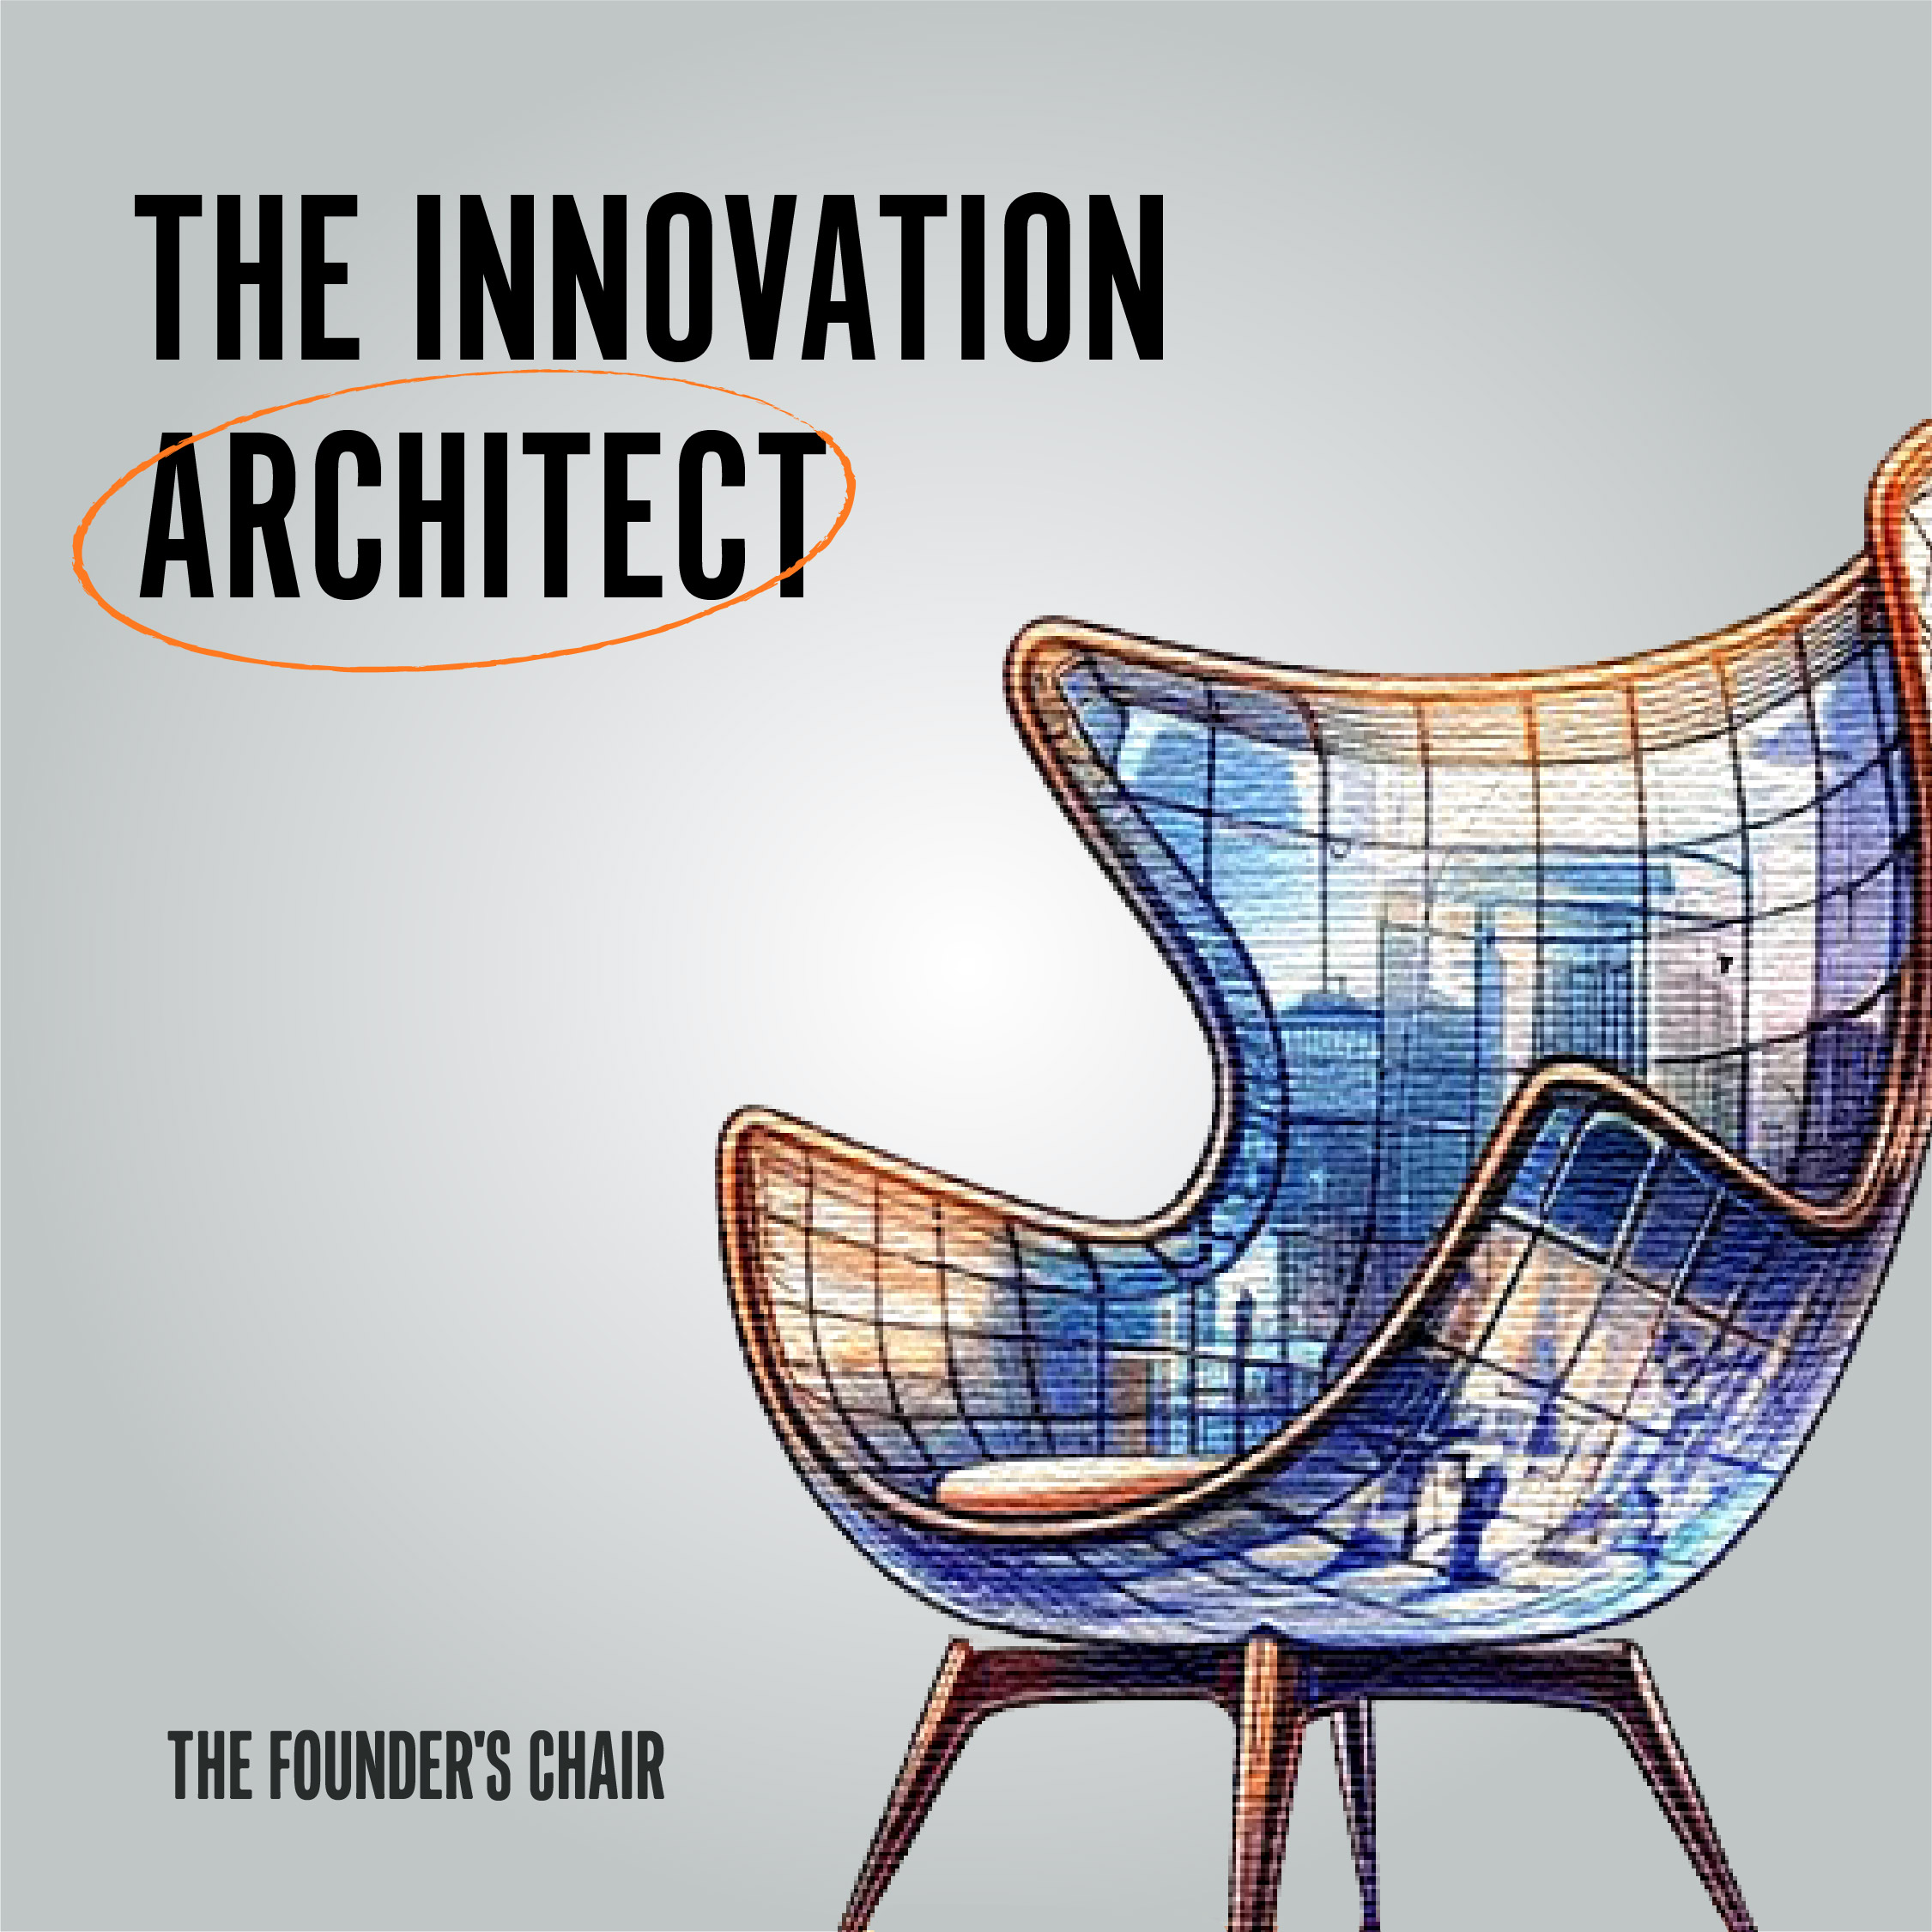 The Innovation Architect Chair